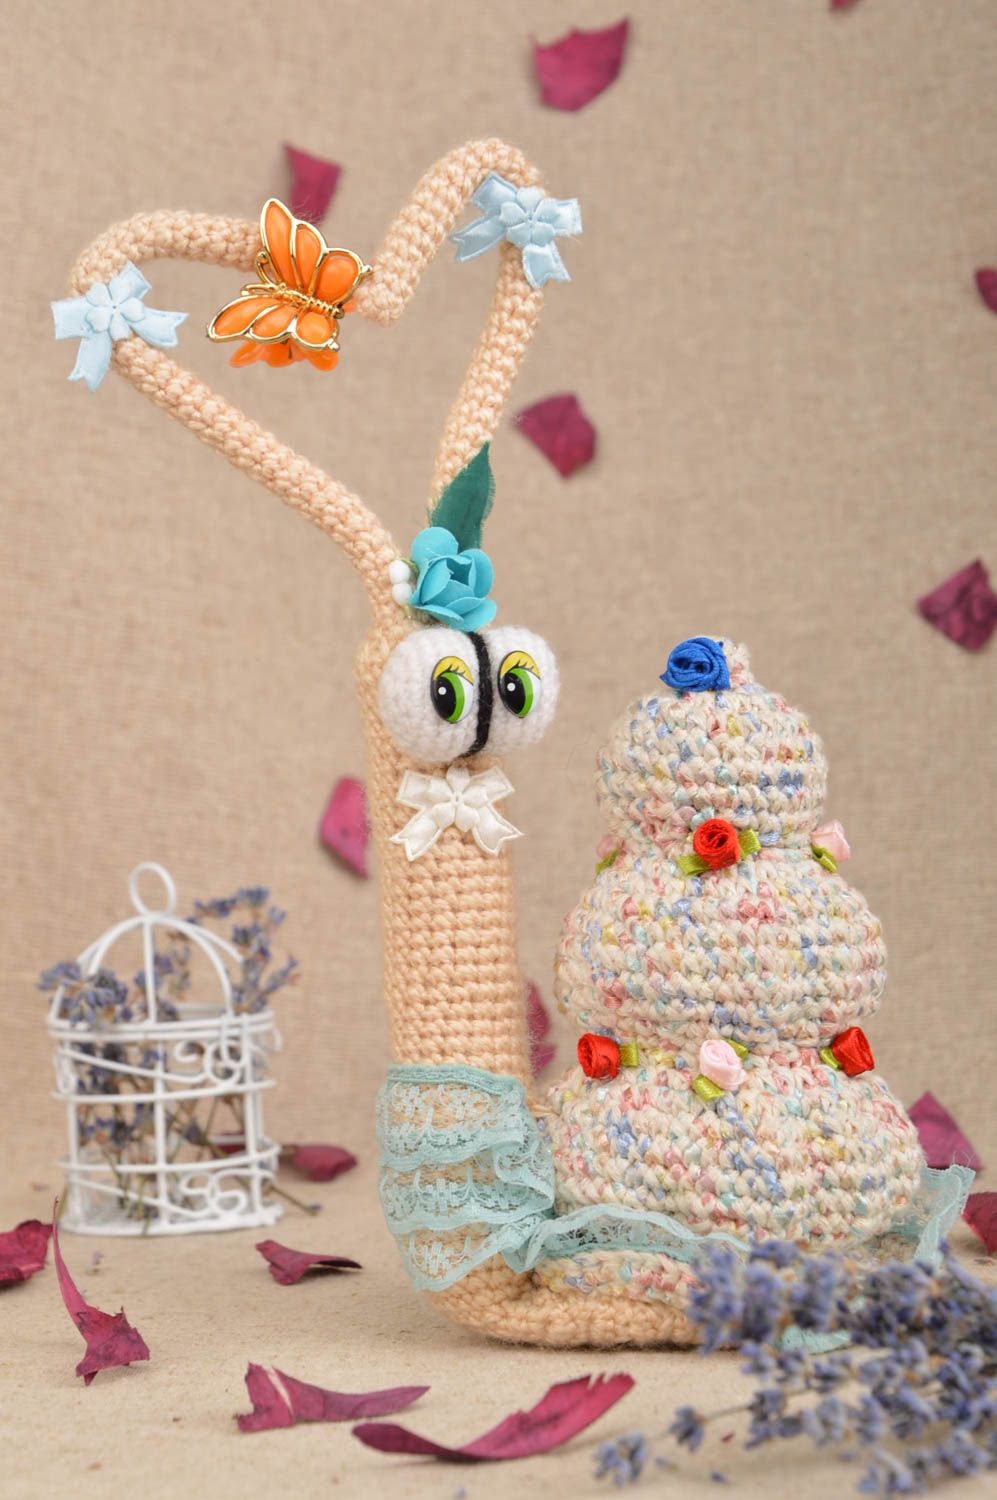 Unusual handmade crochet soft toy stuffed snail toy gifts for kids photo 1